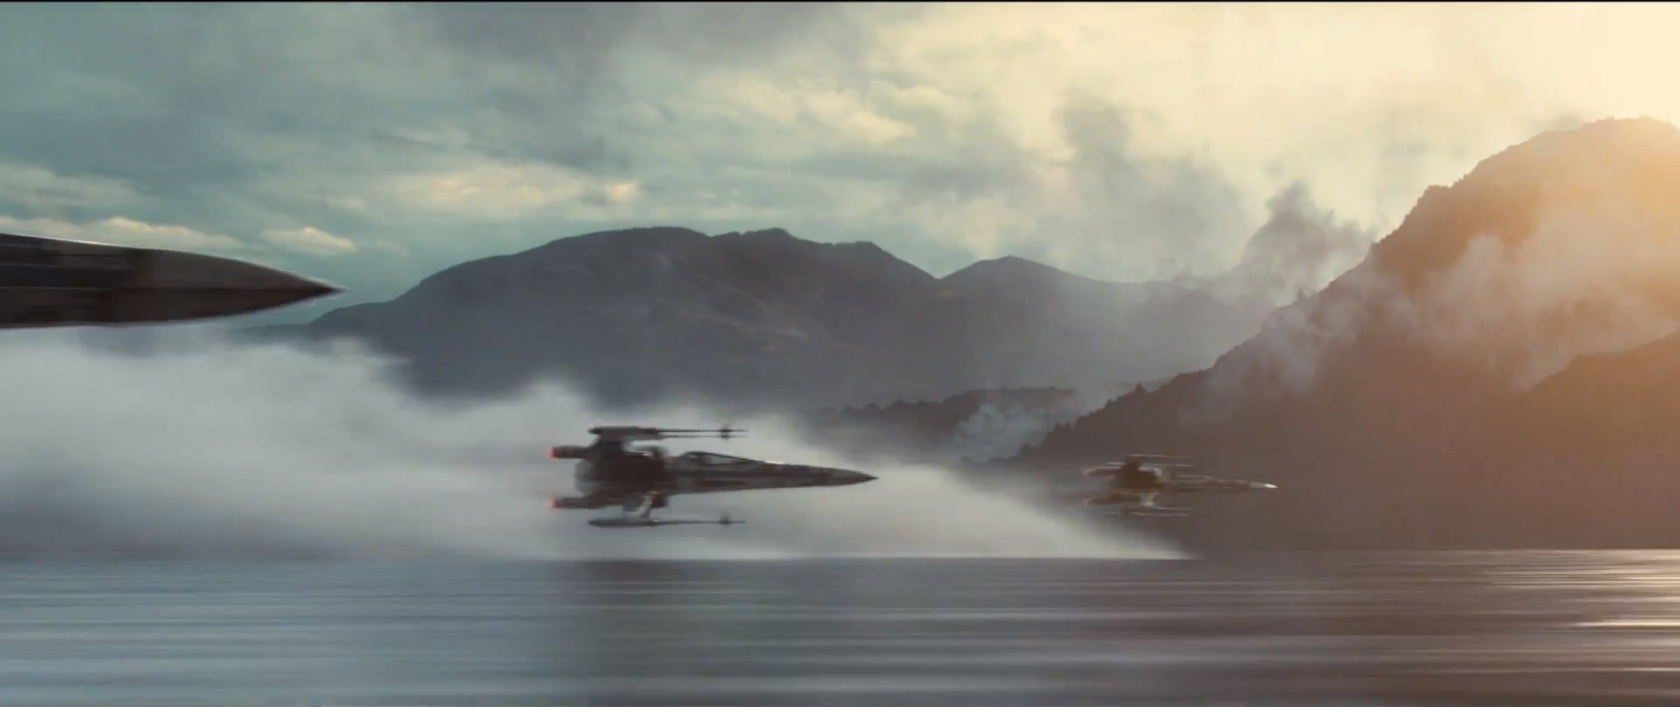 The Star Wars Episode Vii Force Awakens Trailer With A